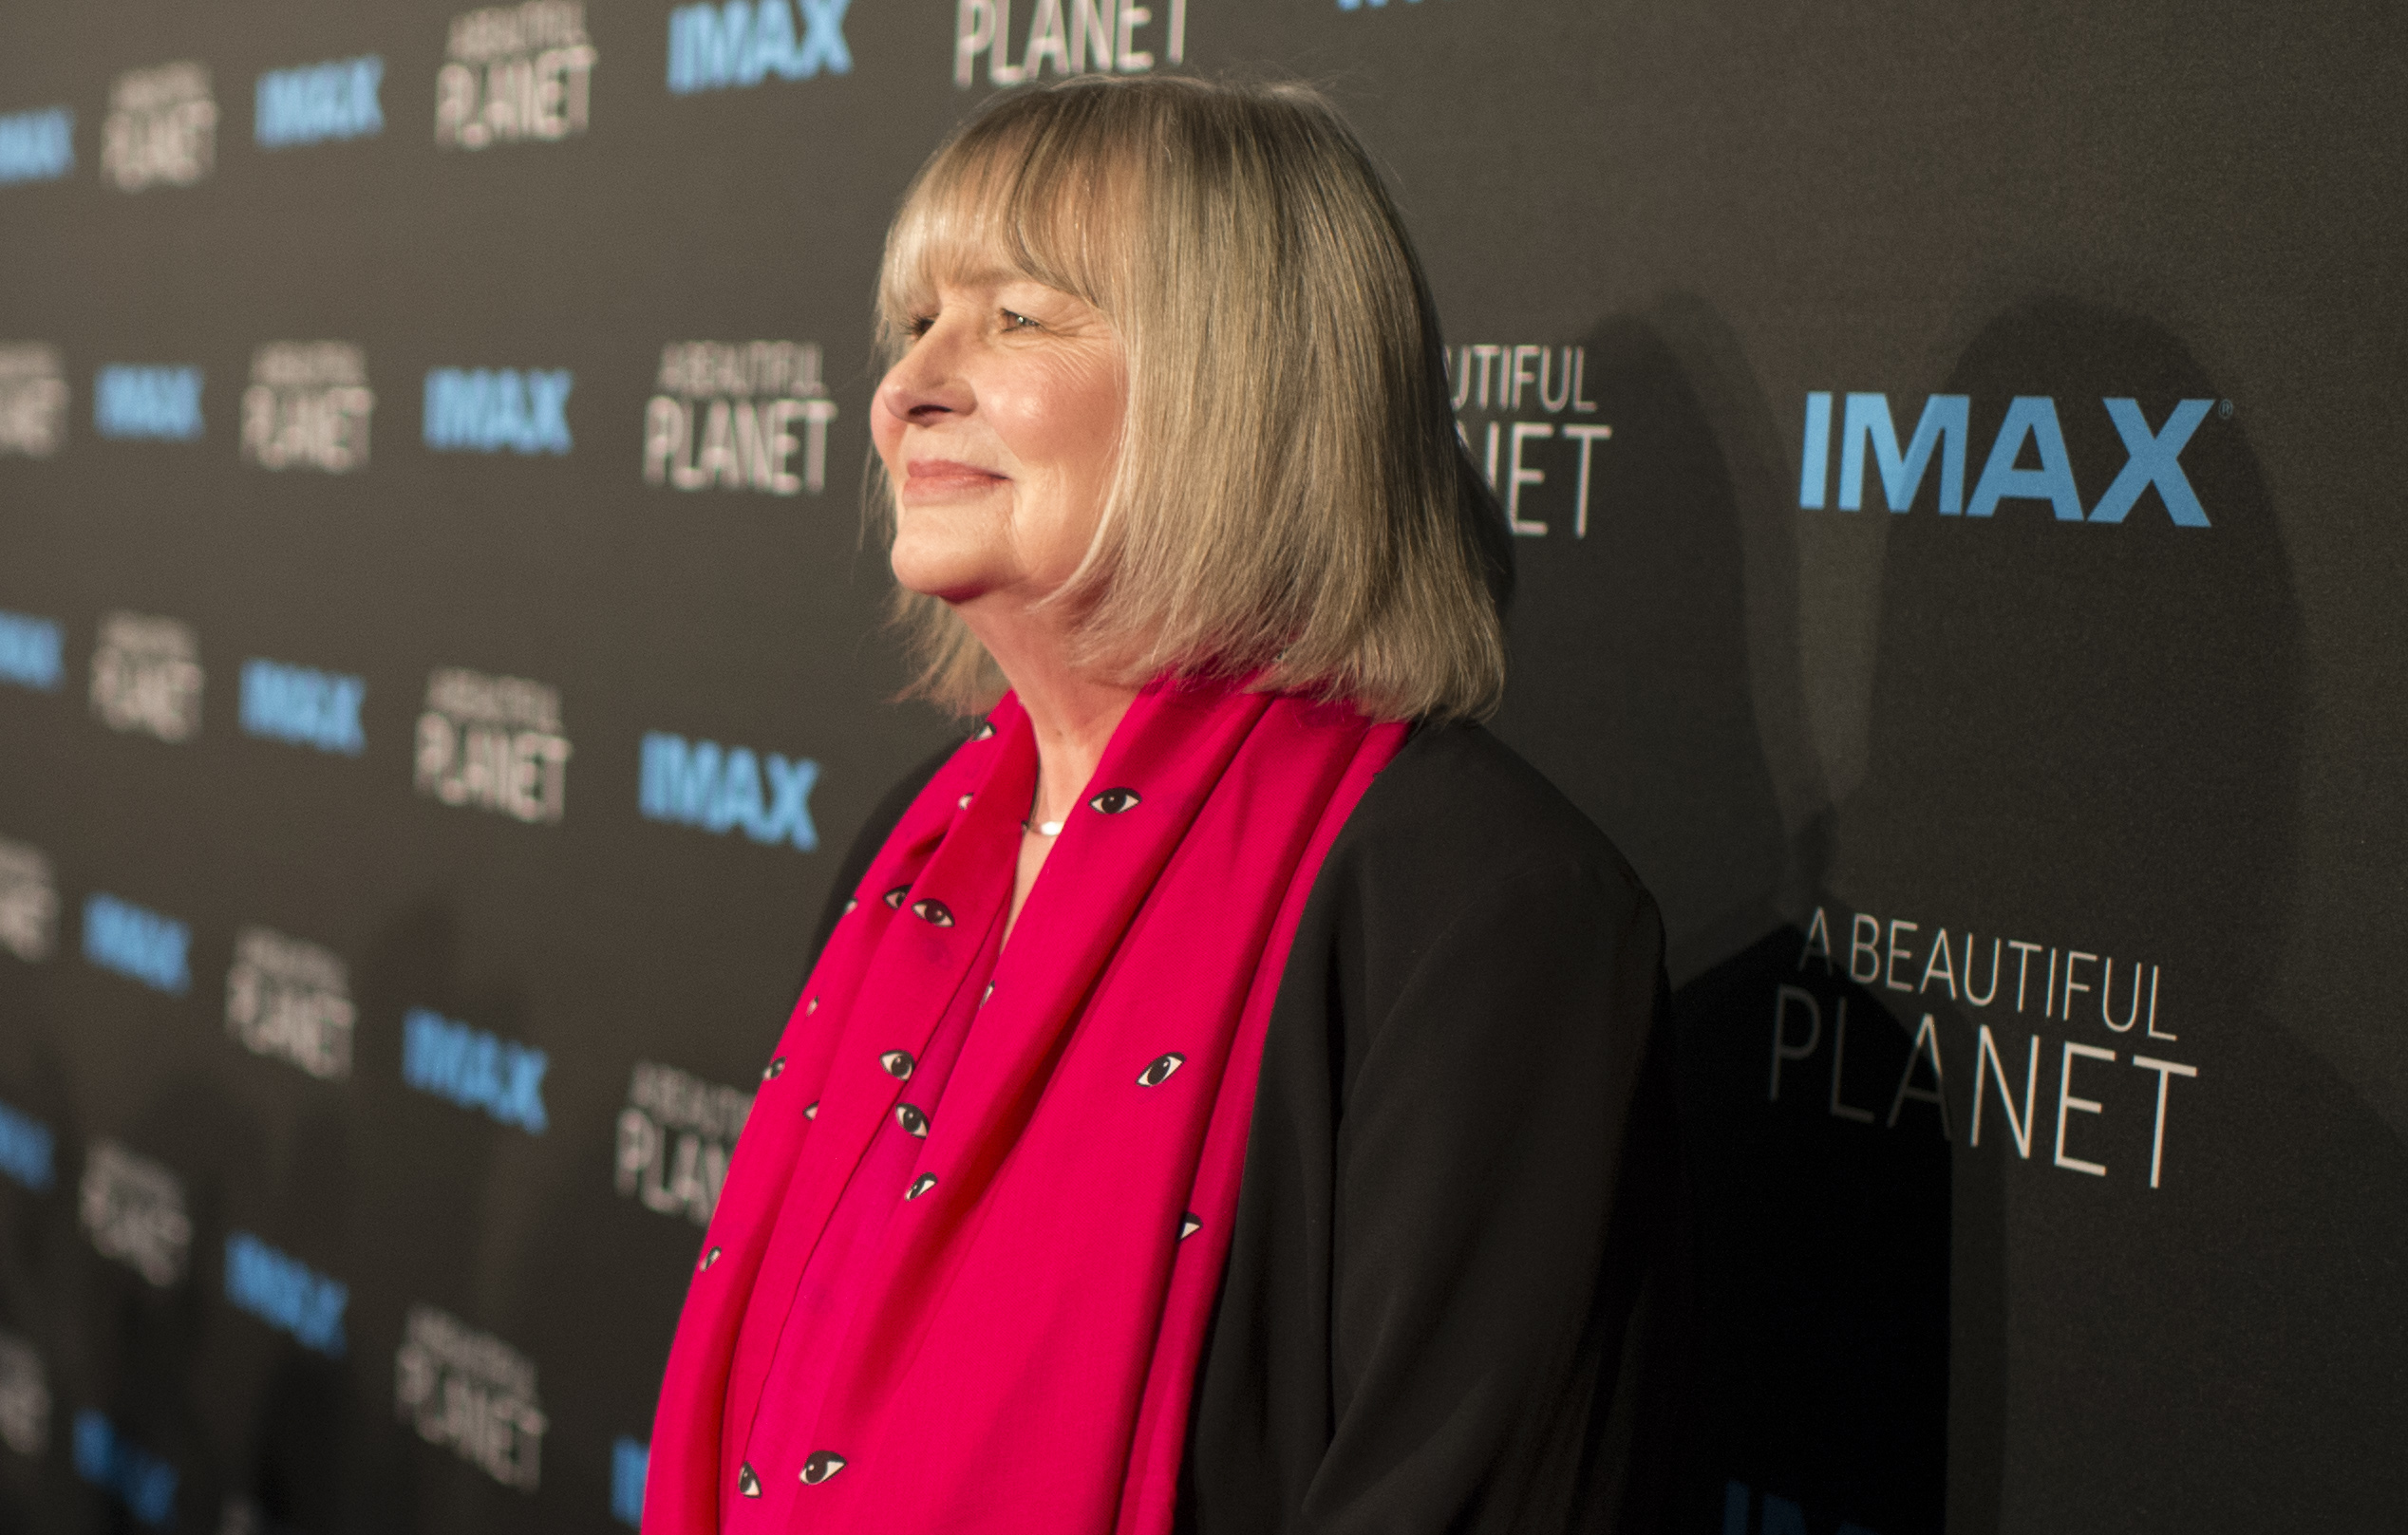 Toni Myers during the world premiere of the film "A Beautiful Planet"